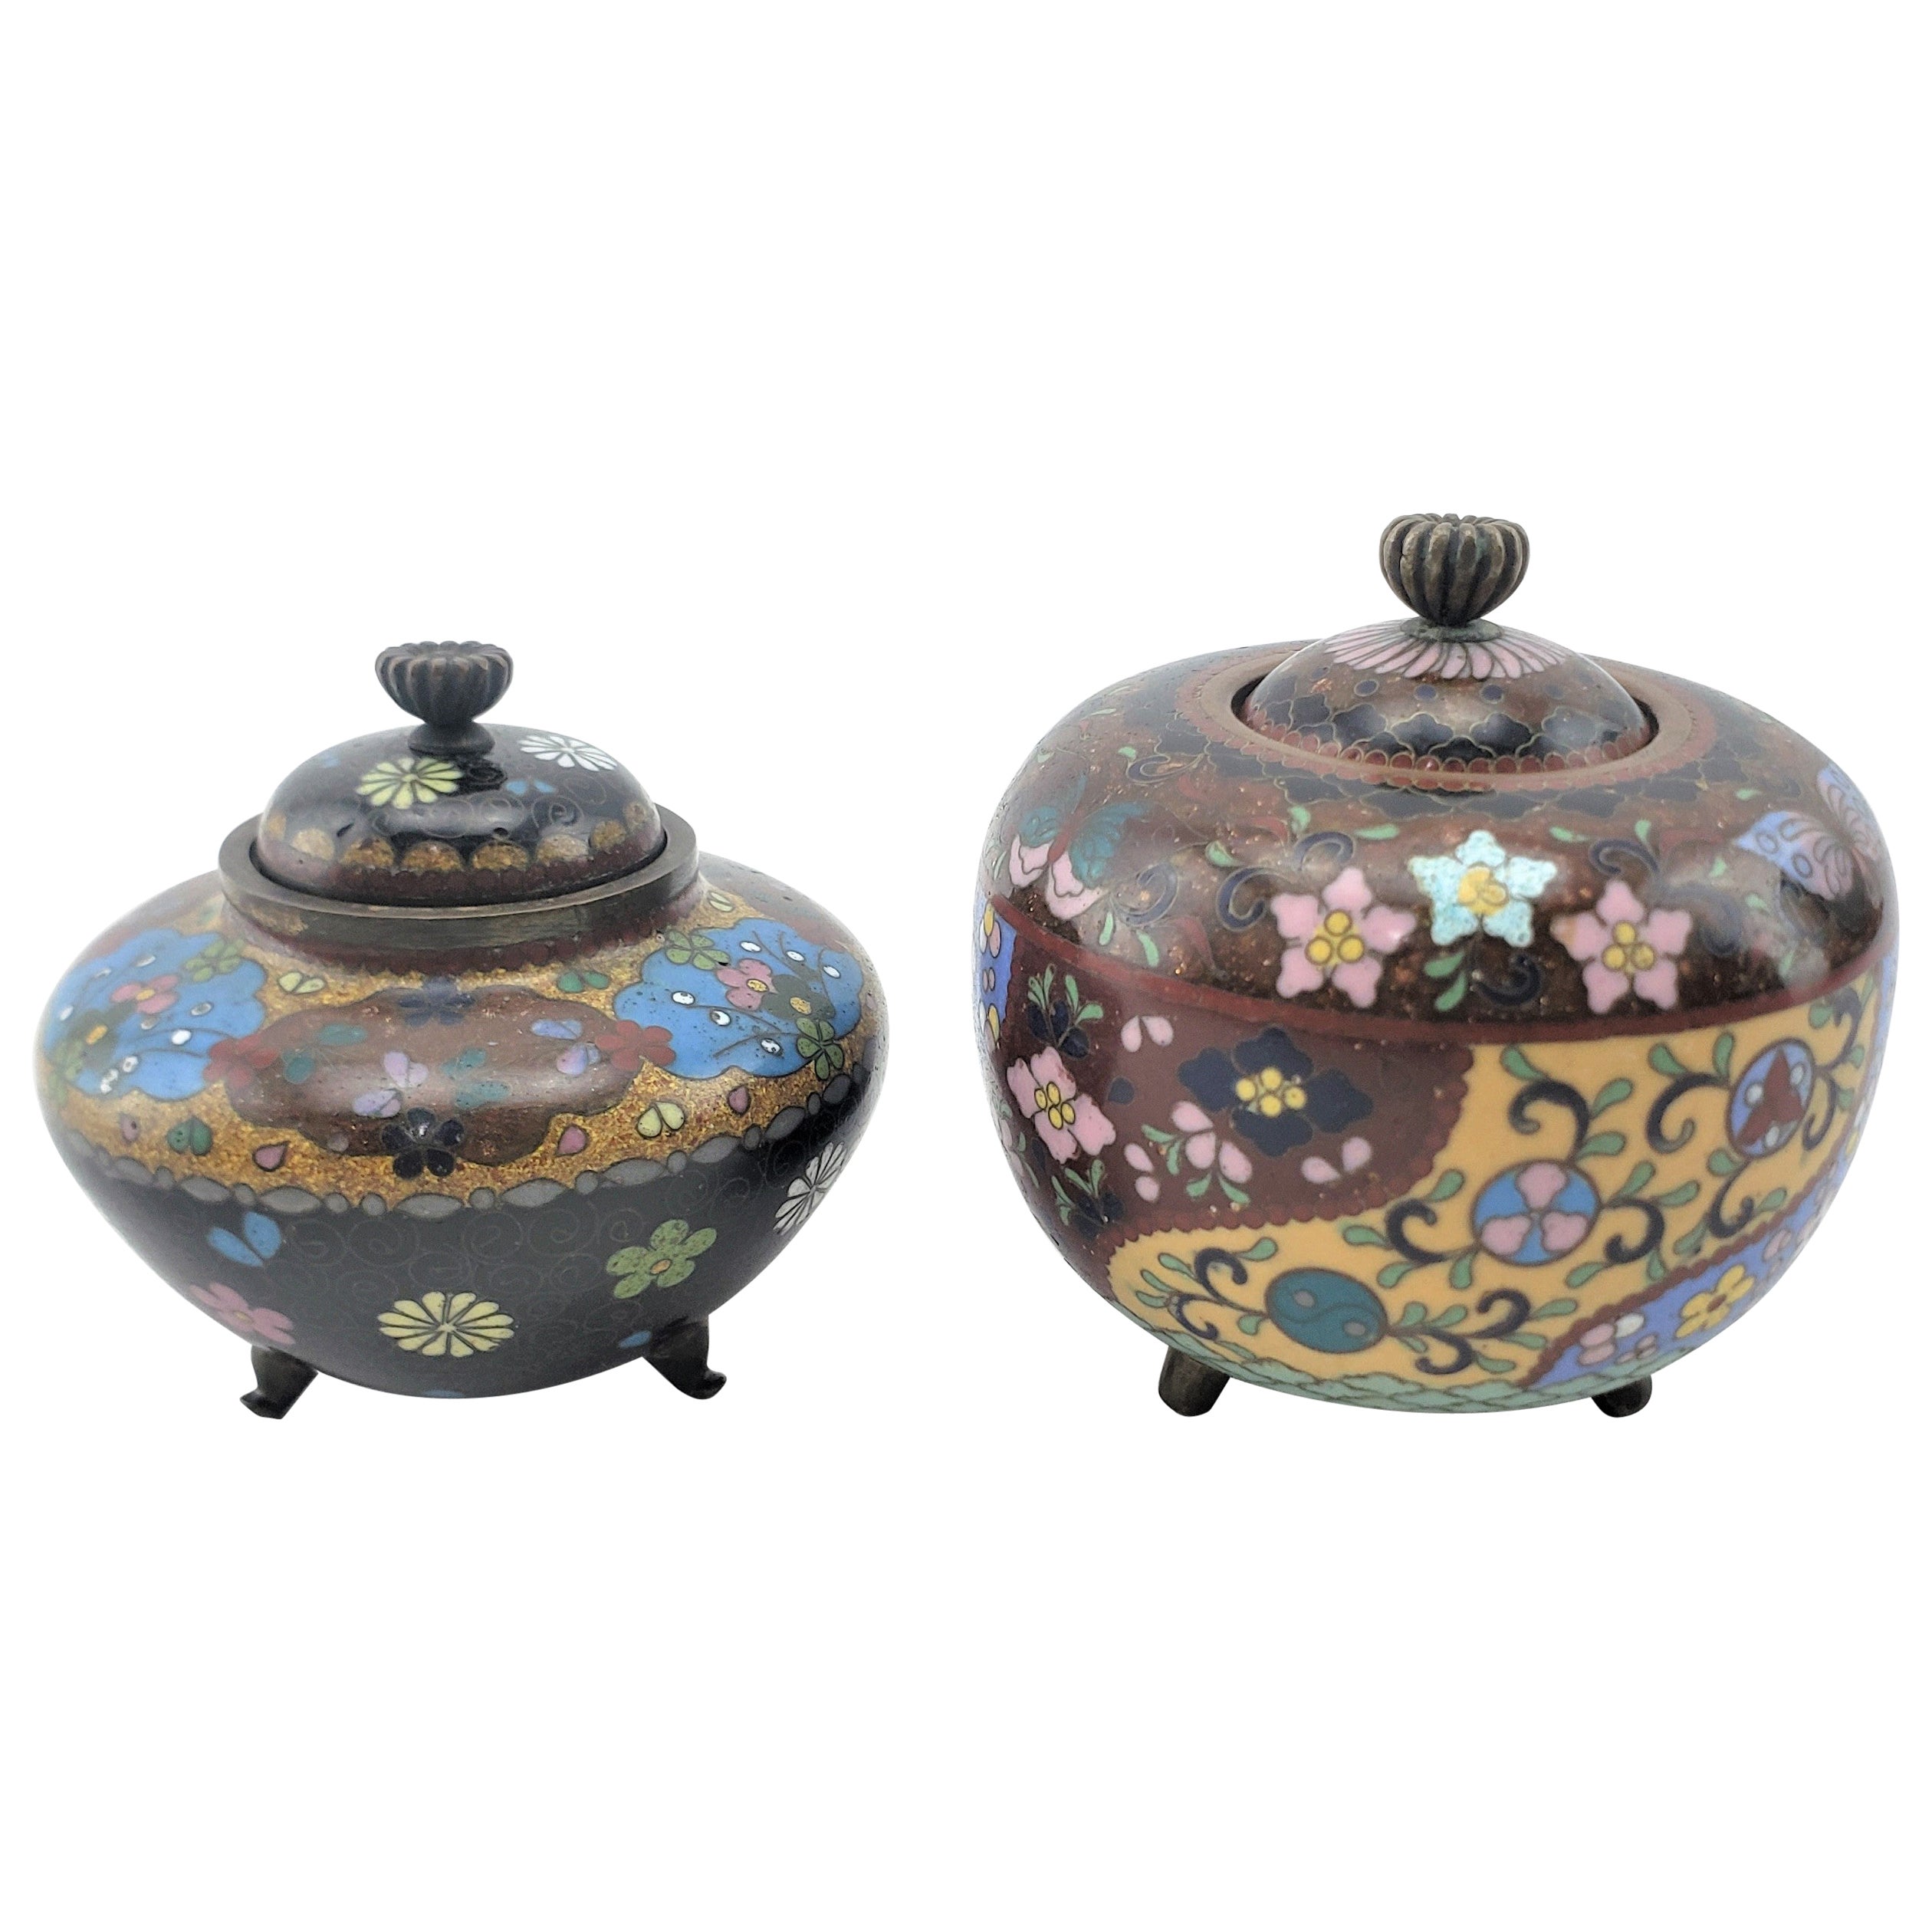 Pair of Antique Japanese Cloisonne Covered Jars with Floral Motif Decoration For Sale